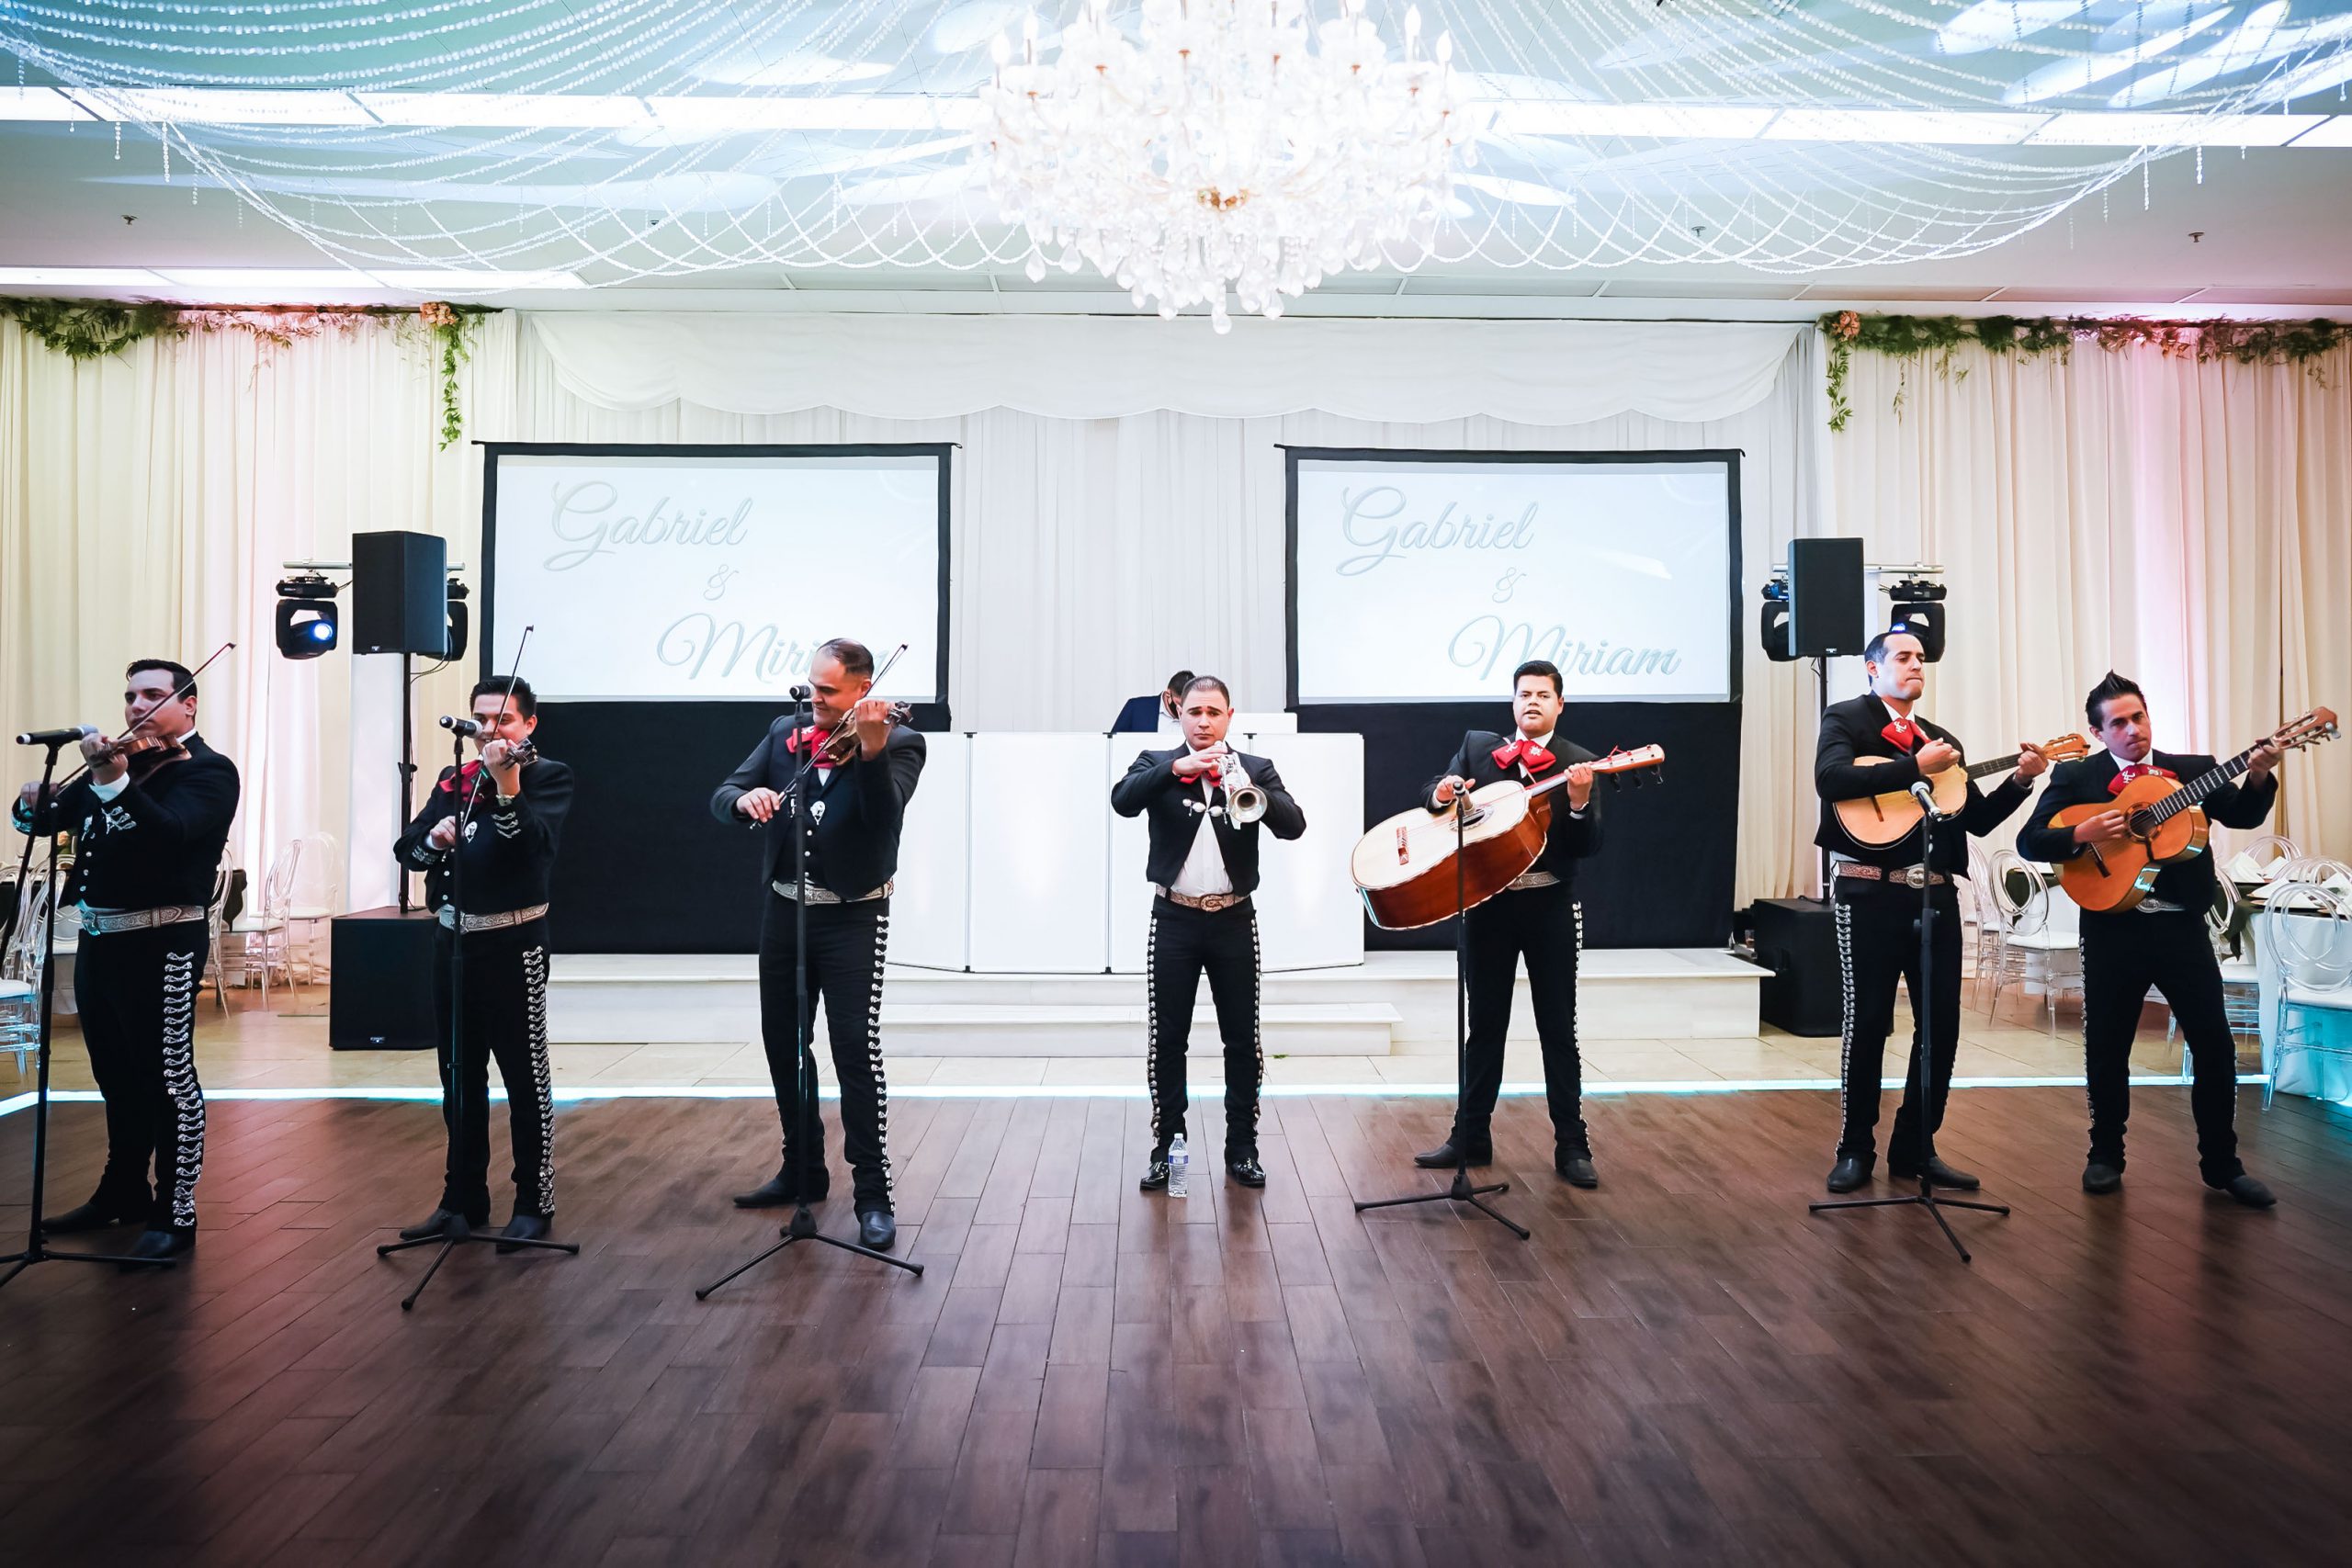 Make your wedding guests go “wow” before they even enter and ensure that they leave a little dazzled with these luxe wedding reception ideas!